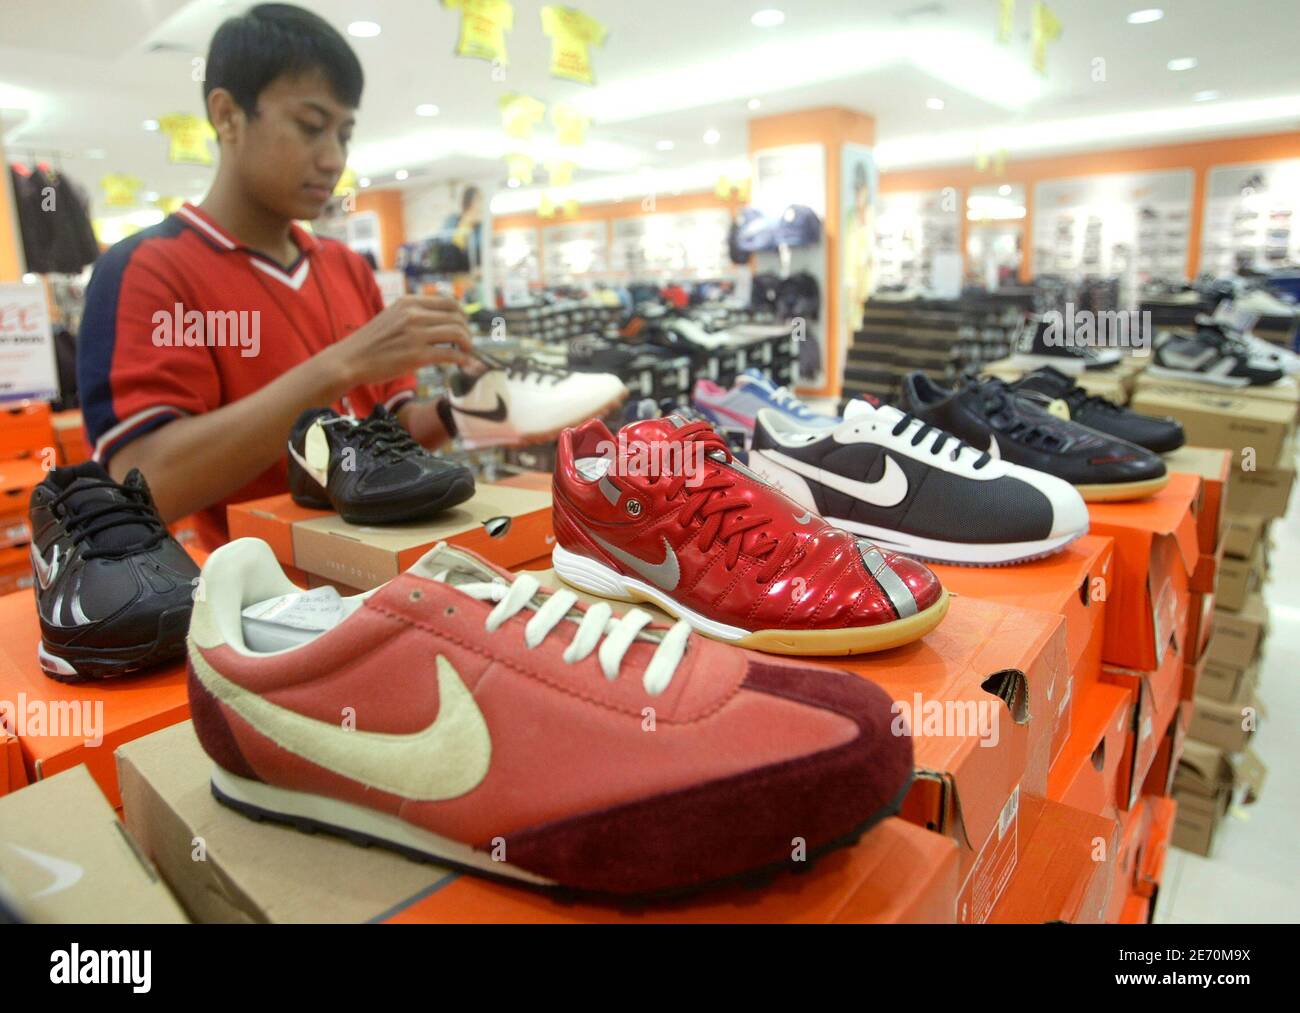 A worker holds a Nike shoe at a shopping mall in Jakarta July 17, 2007.  Sportswear giant Nike Inc. intends to expand its use of Indonesia as a  production hub, despite a